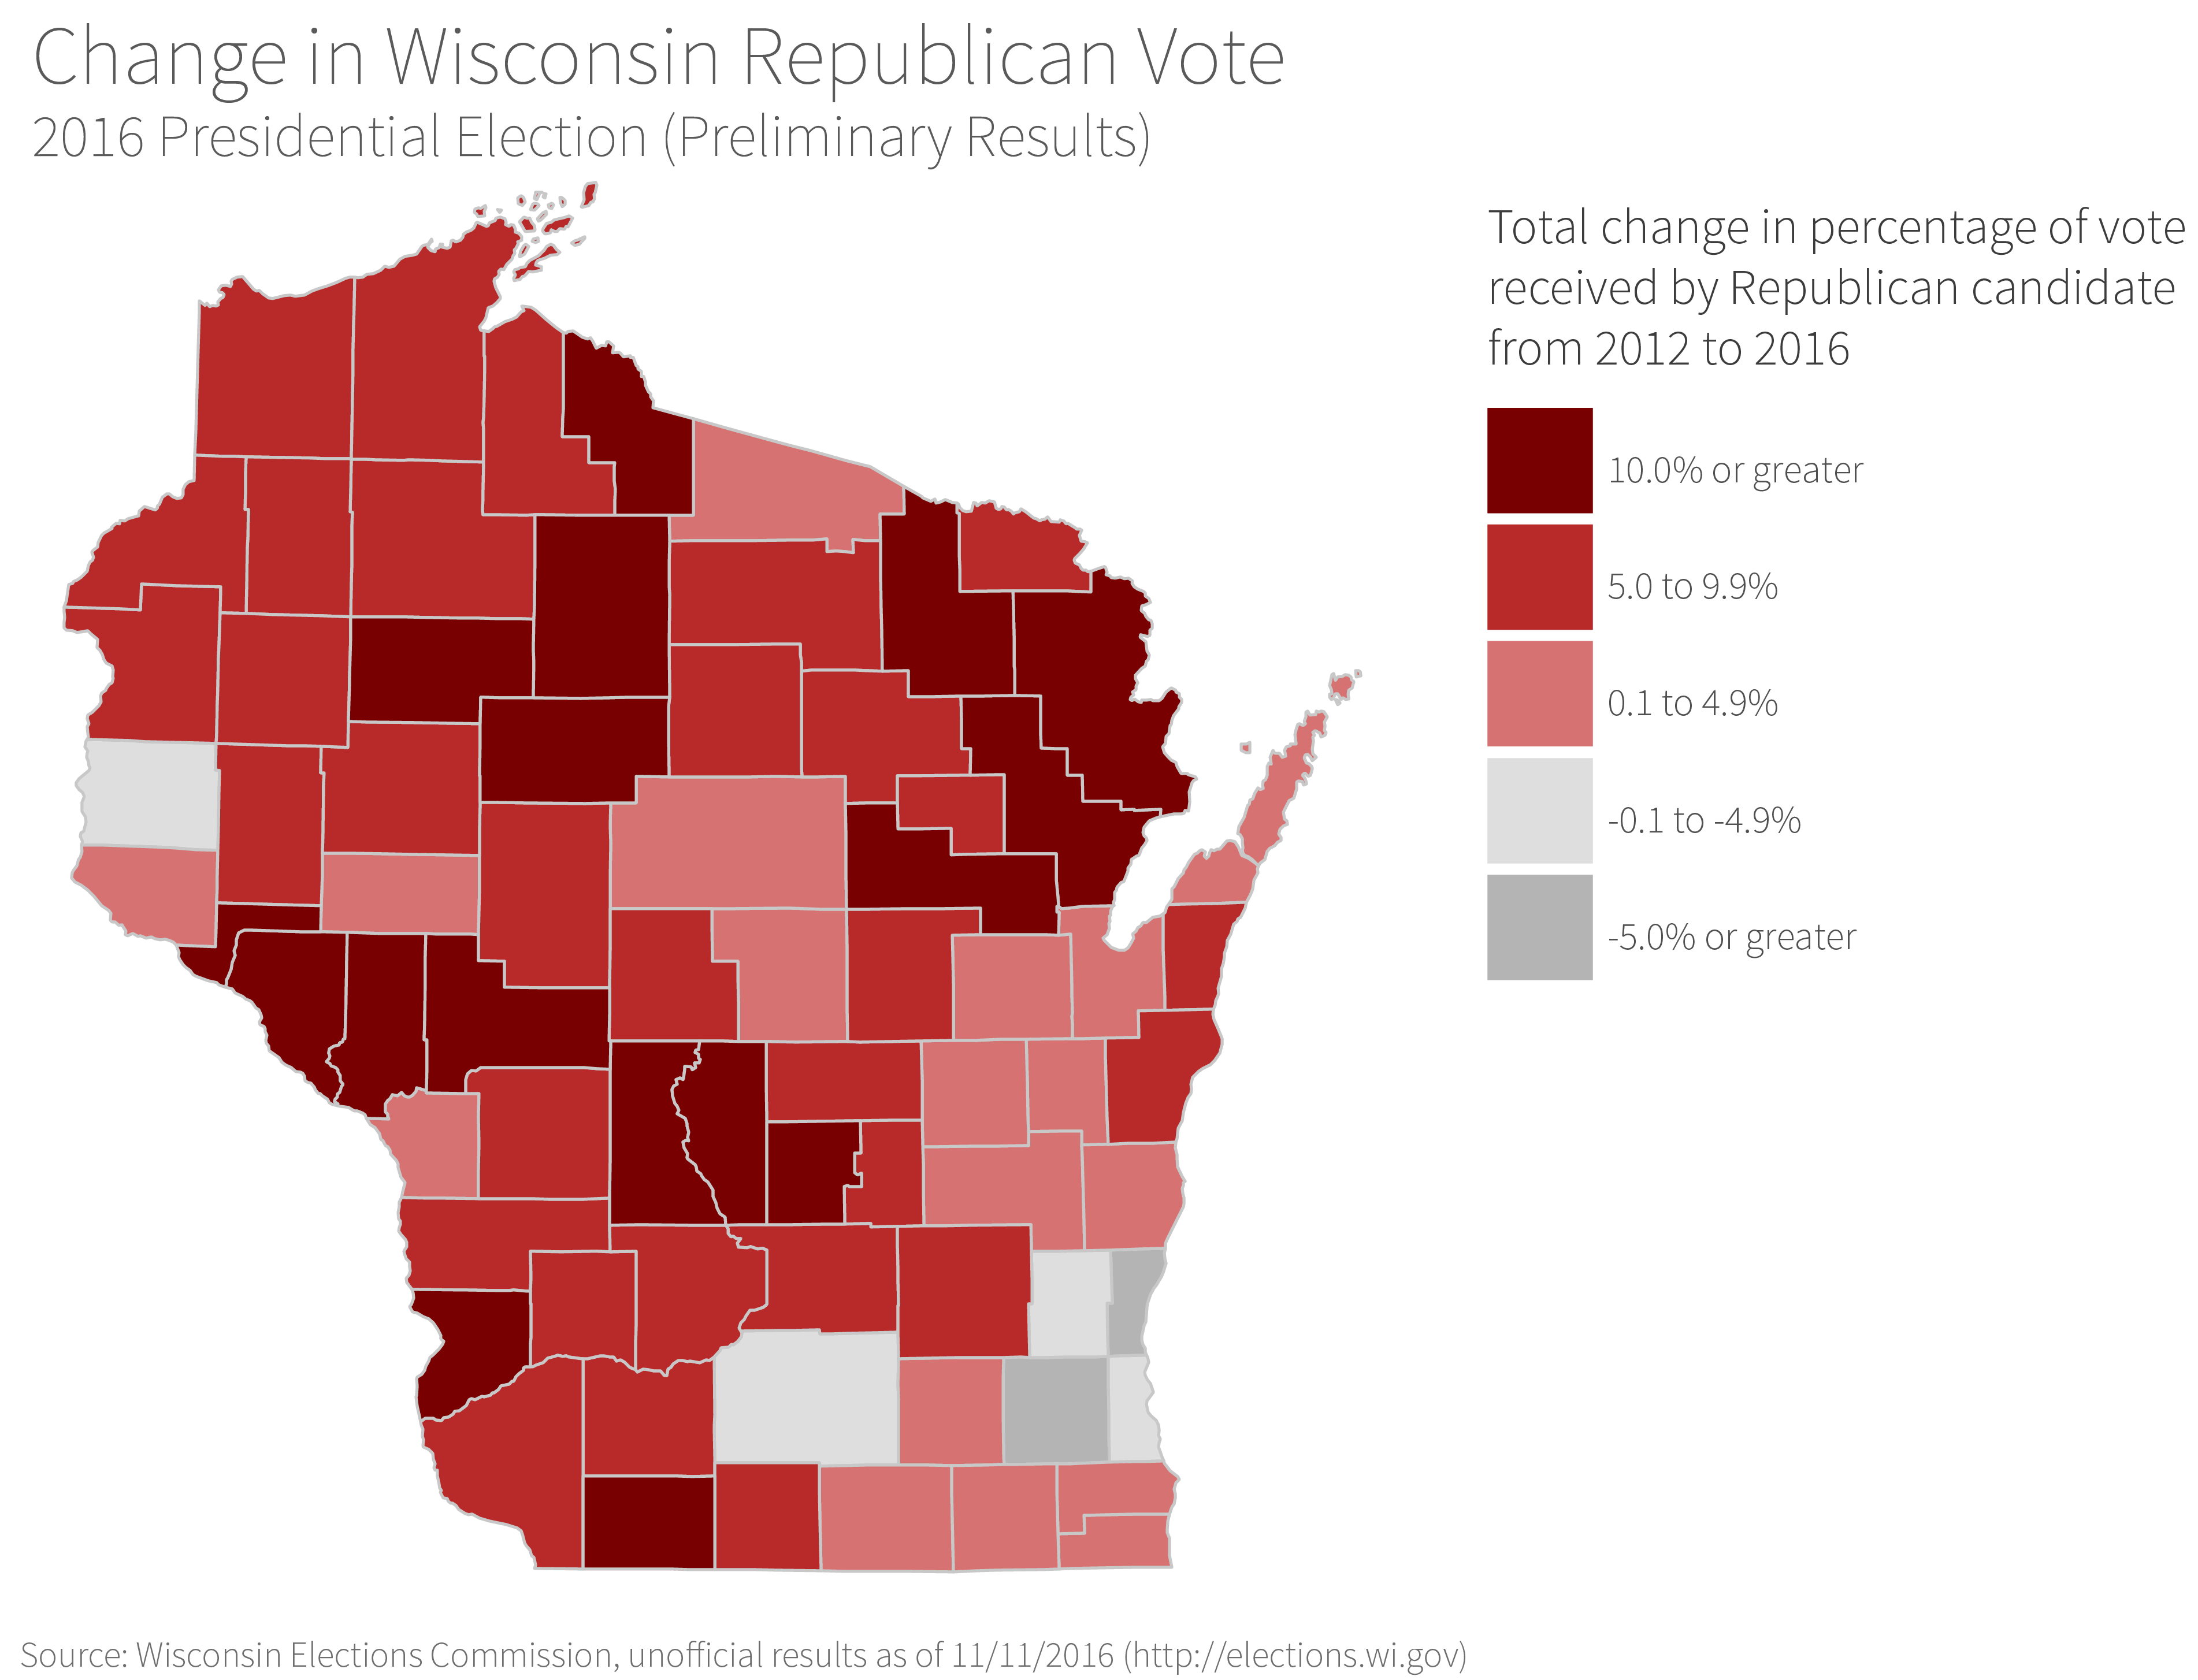 map of Wisconsin showing total change in percentage of vote received by Republican candidate from 2012 to 2016